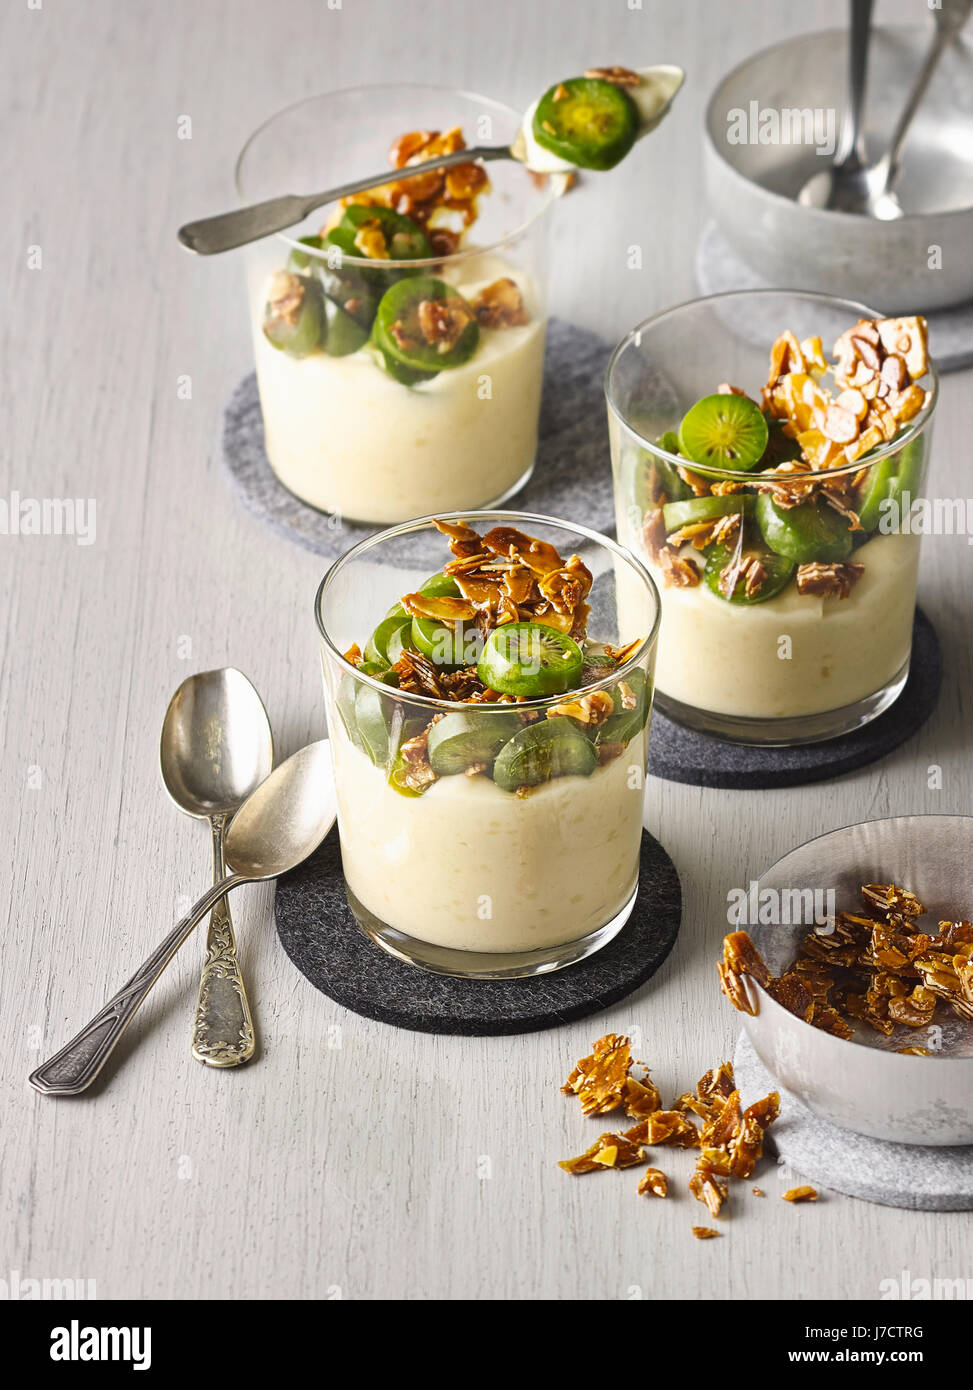 Almond pudding with nergi berries Stock Photo